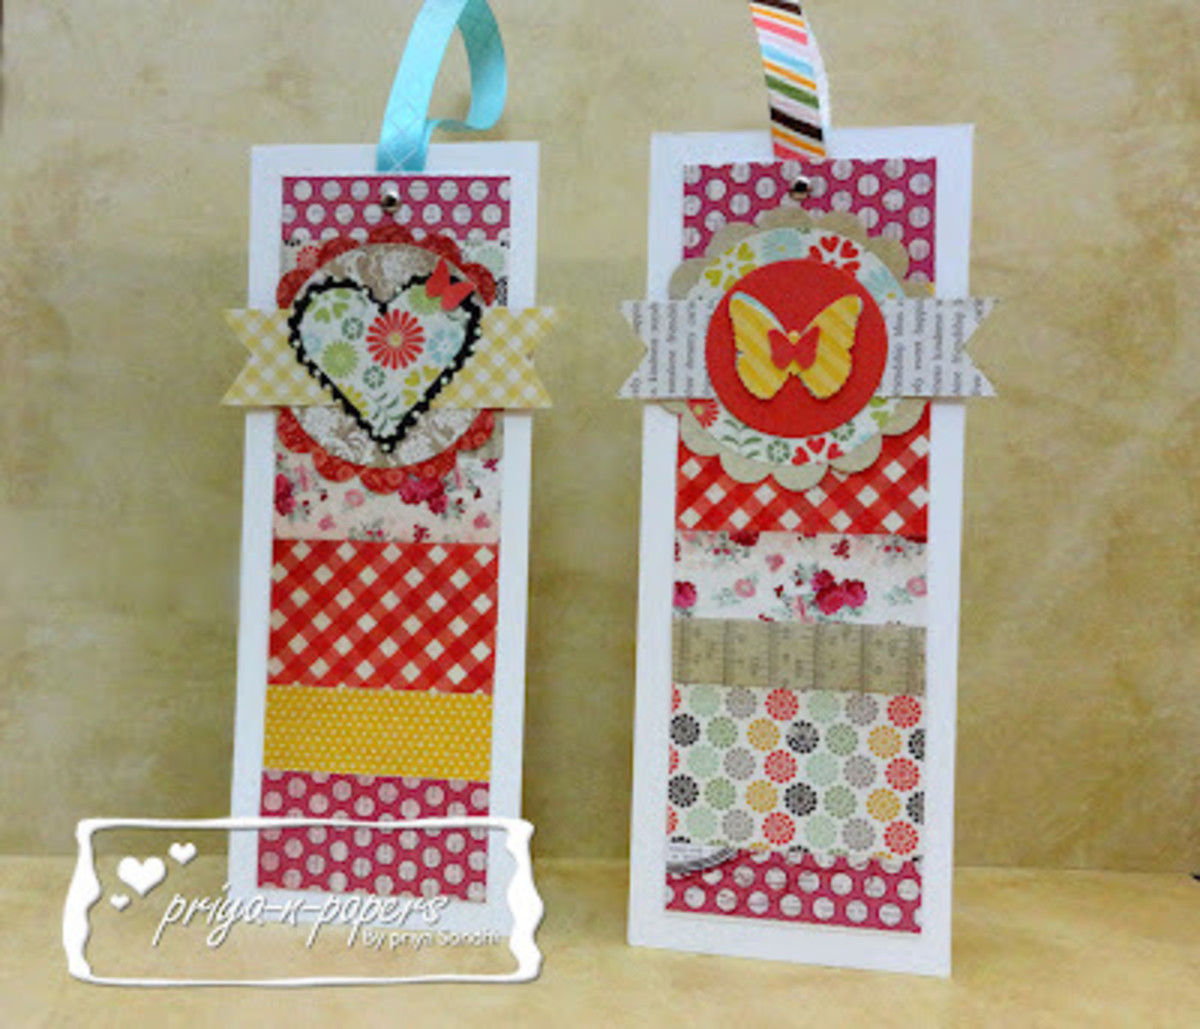 Create tags using patterned paper scraps to create colorful tags